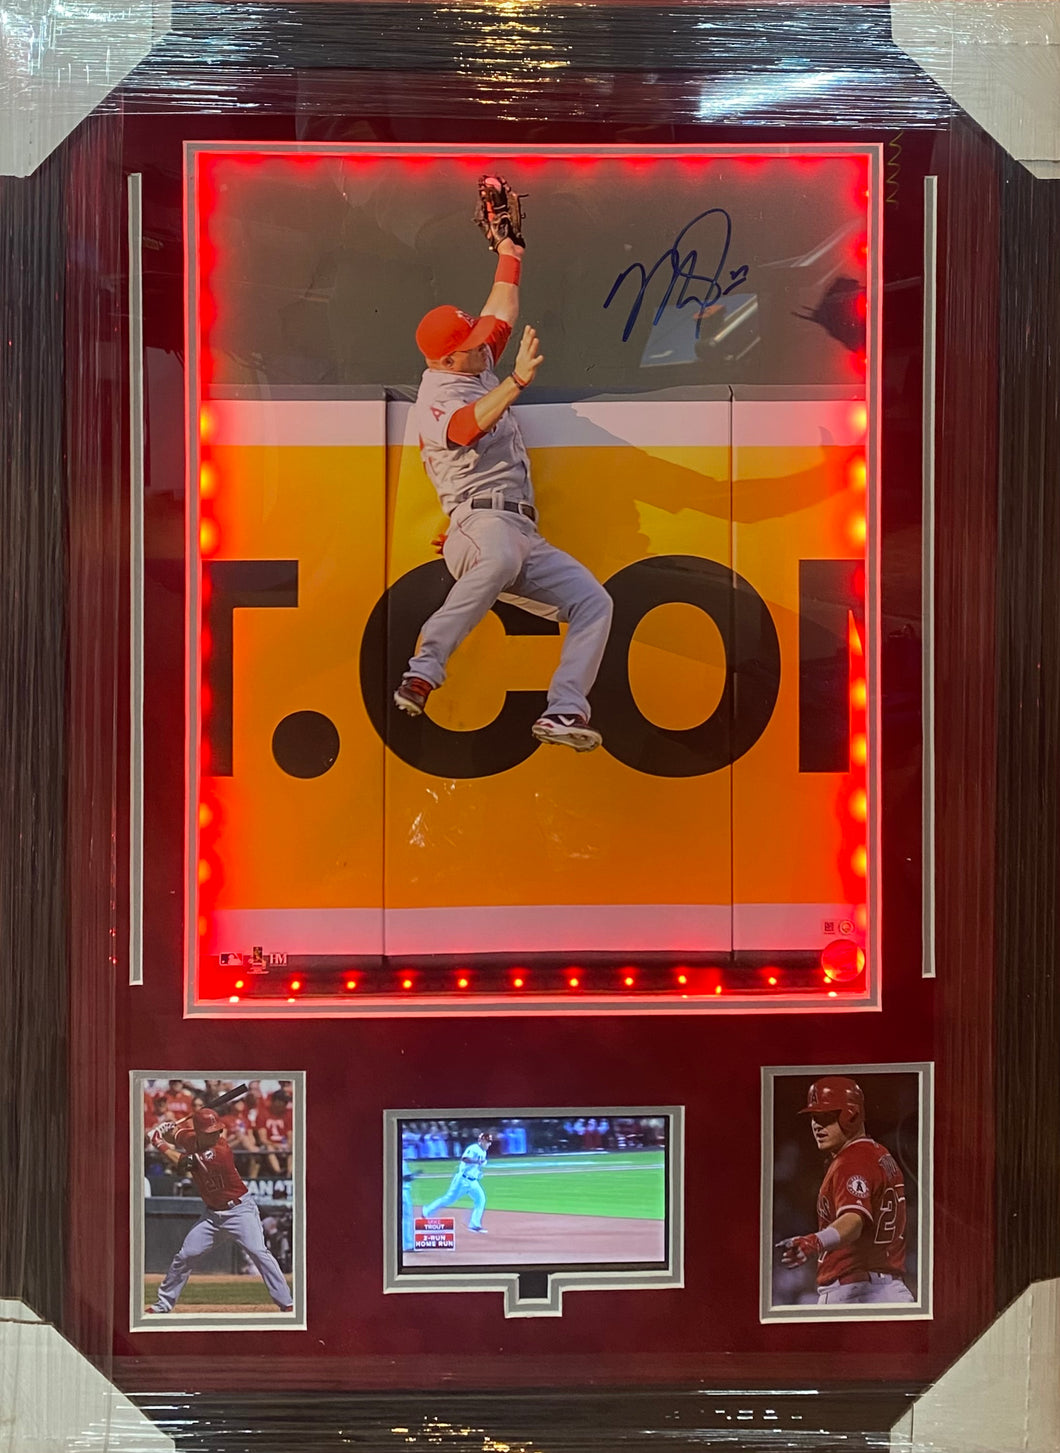 Los Angeles Angels Mike Trout Signed 16x20 Cadillac Framed & Matted Photo with MLB COA